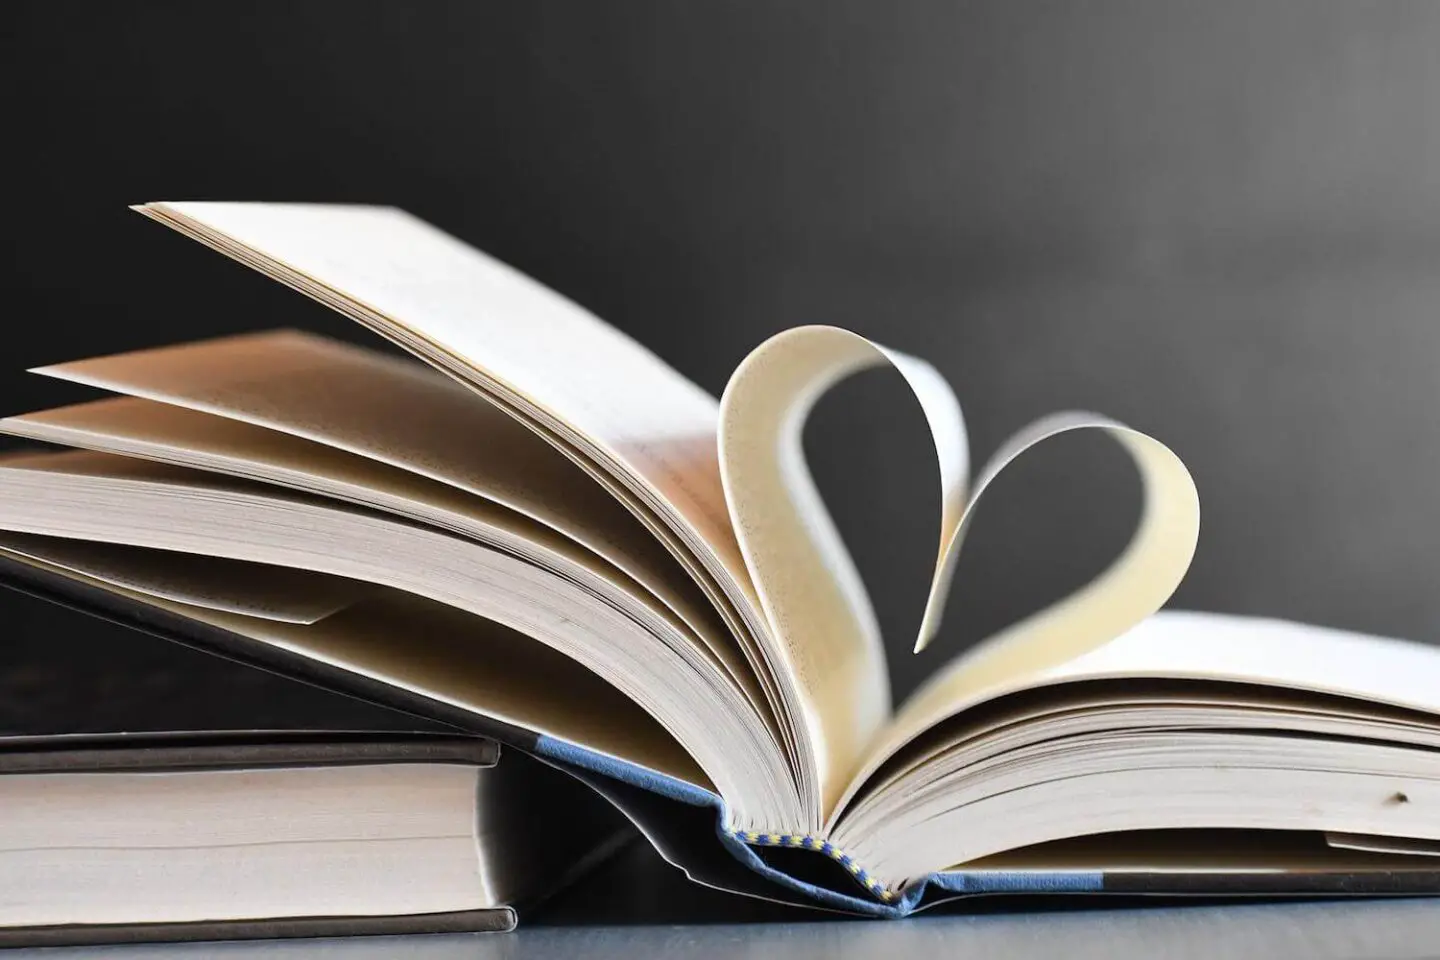 A book open, with 2 pages folding down towards each other to make a heart